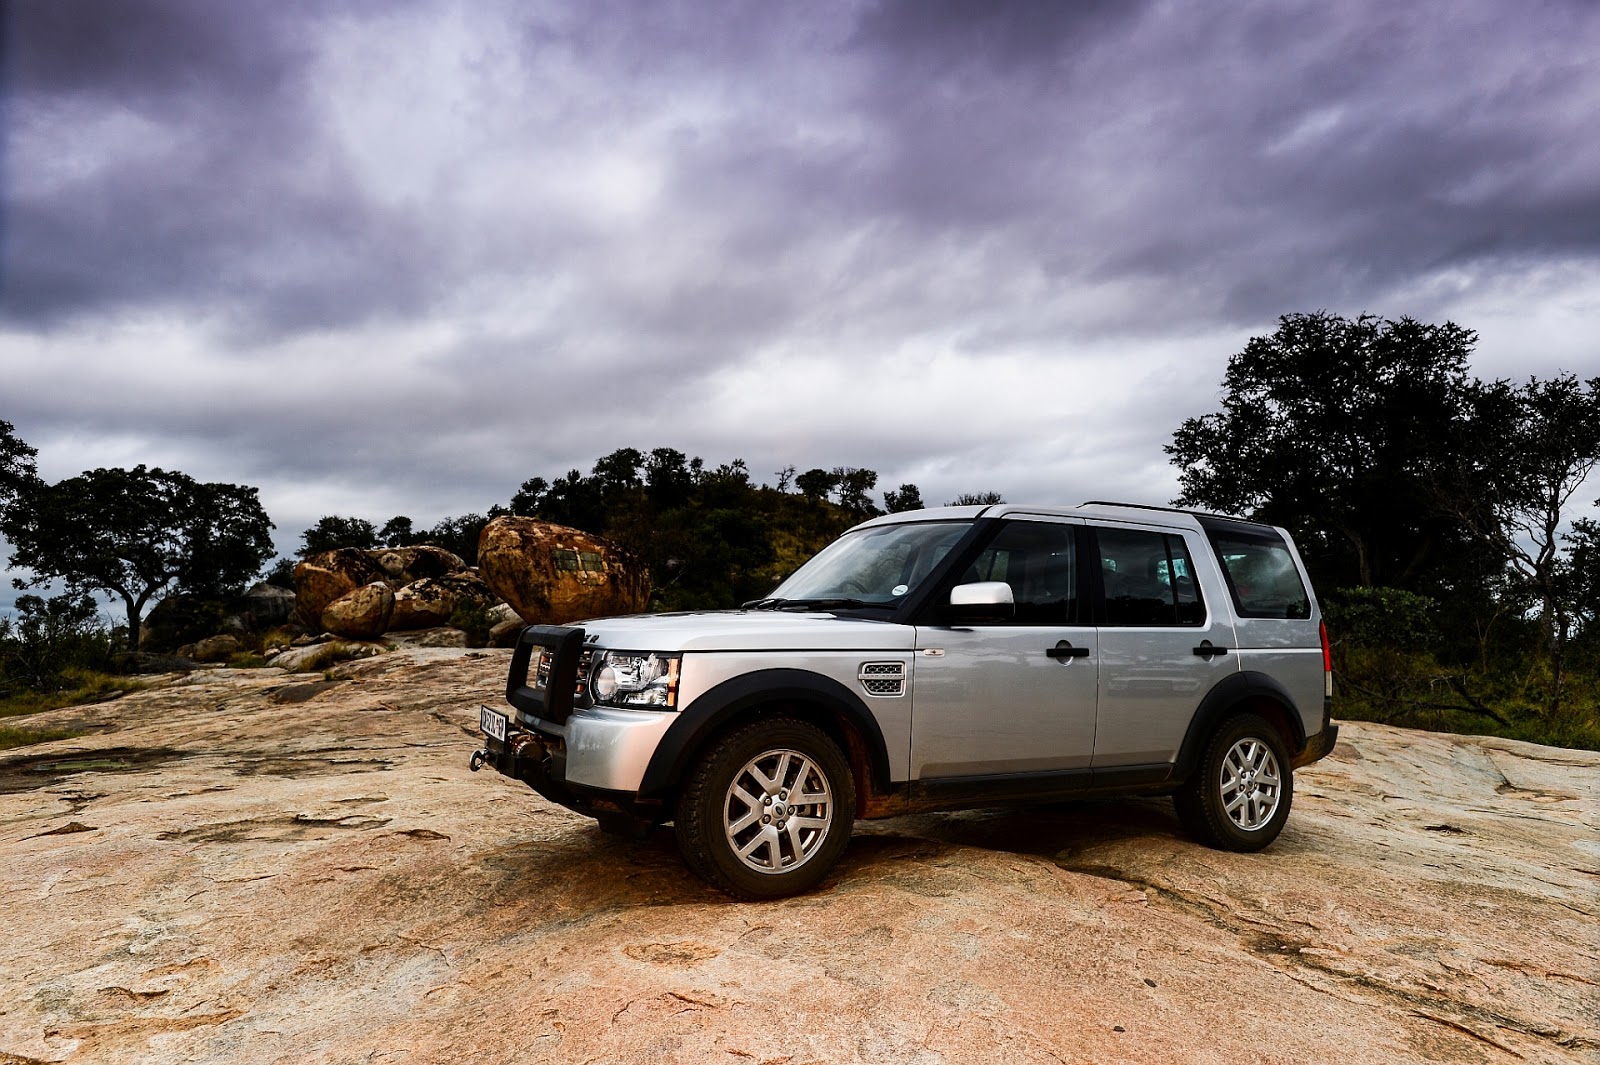 IN4RIDE: LAND ROVER DISCOVERY 4 XS RELEASED IN SA